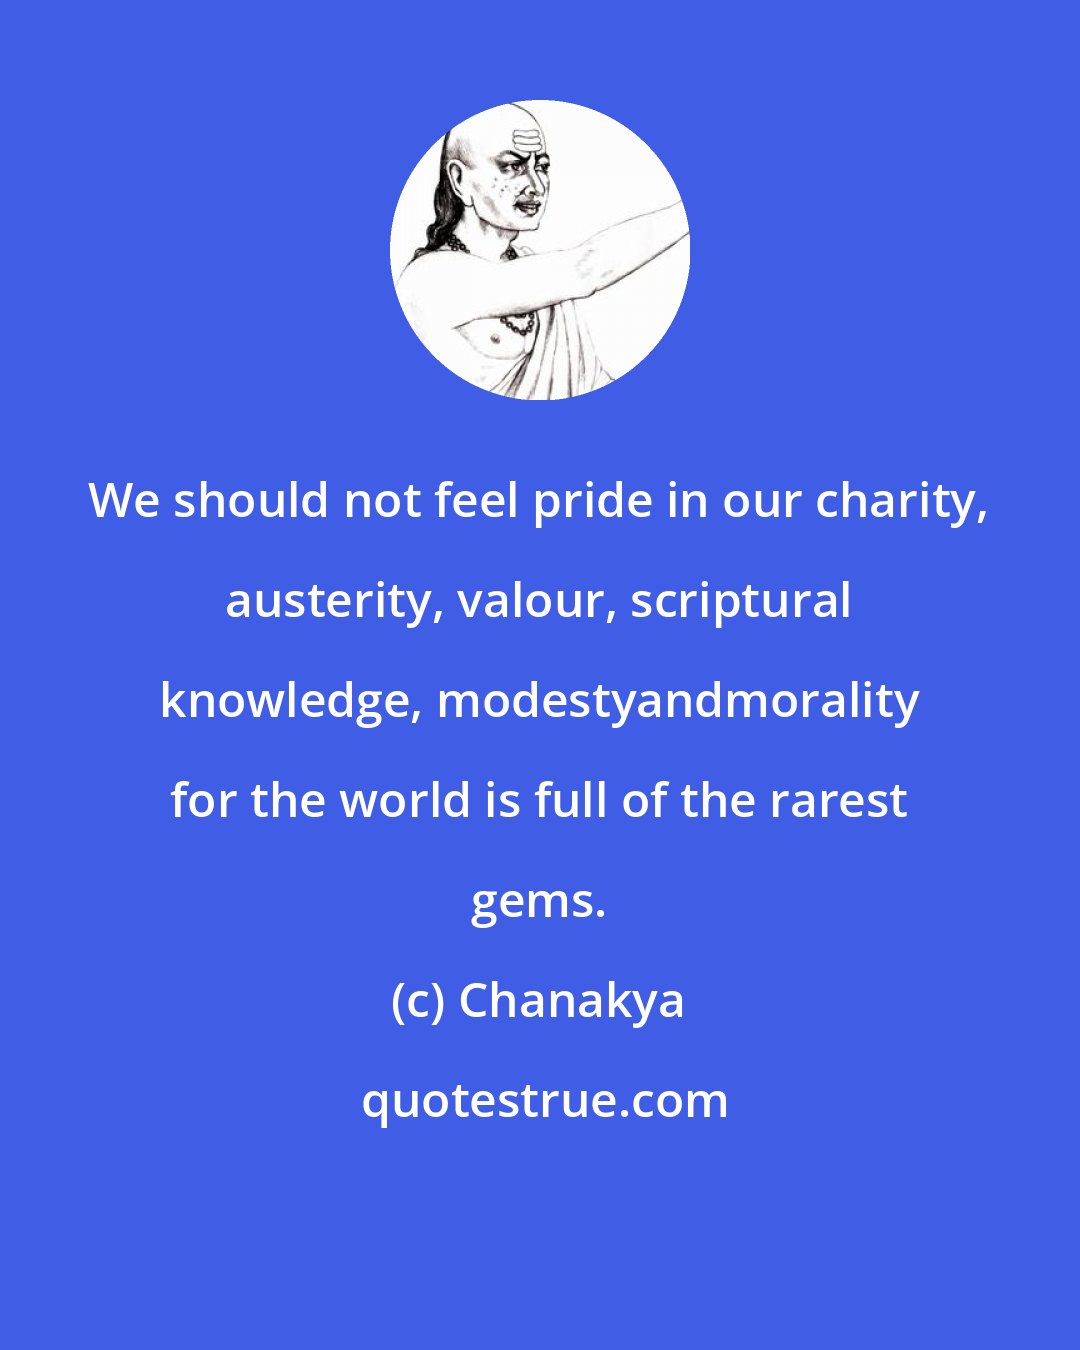 Chanakya: We should not feel pride in our charity, austerity, valour, scriptural knowledge, modestyandmorality for the world is full of the rarest gems.